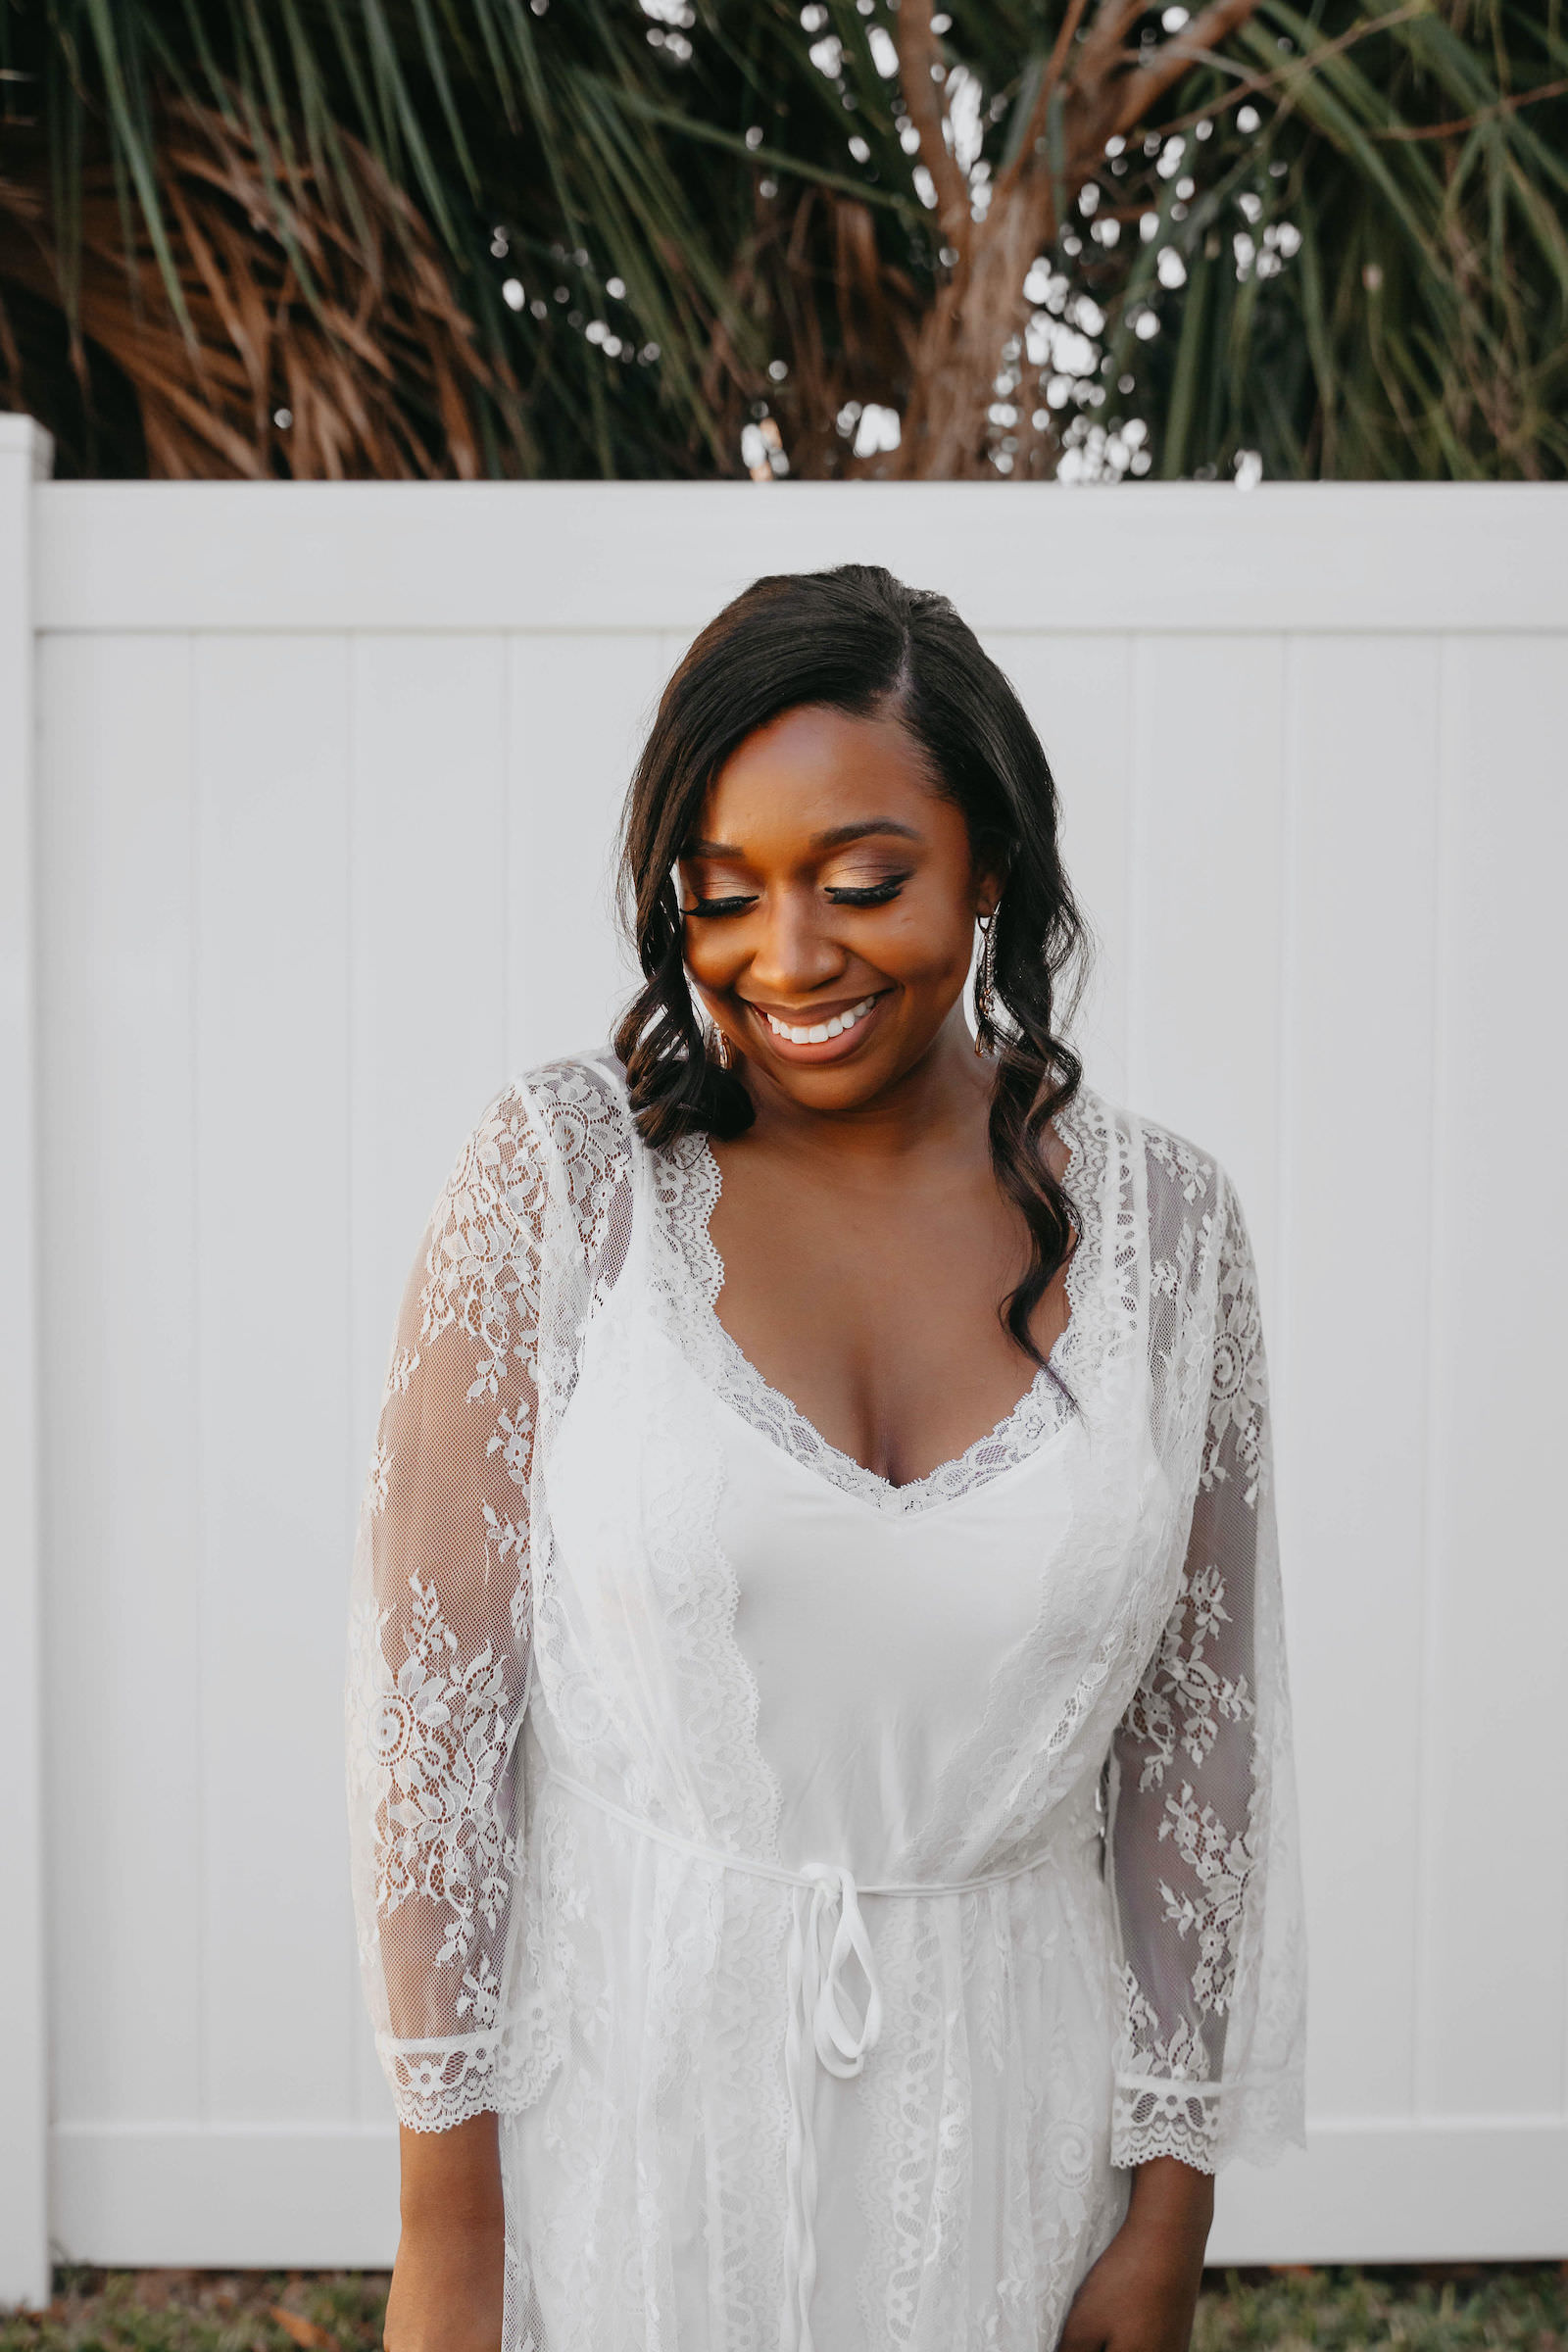 Tampa Bride Getting Ready Wearing White Lace Robe | Natural Bridal Makeup African American Beauty | Natural Loose Curls Bridal Hairstyle